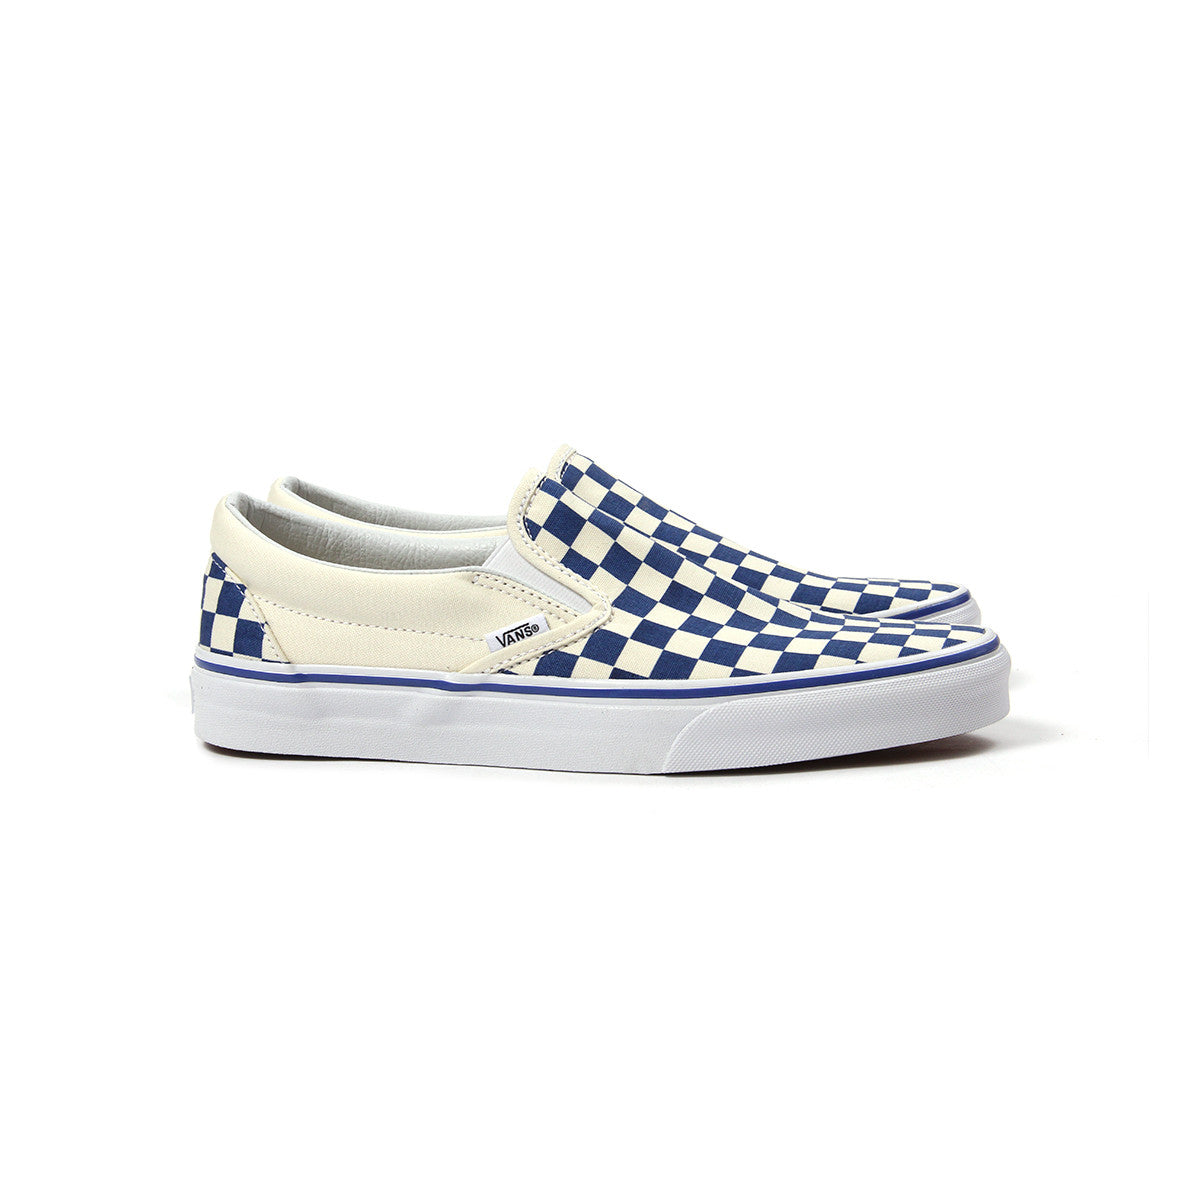 navy blue and white checkered vans